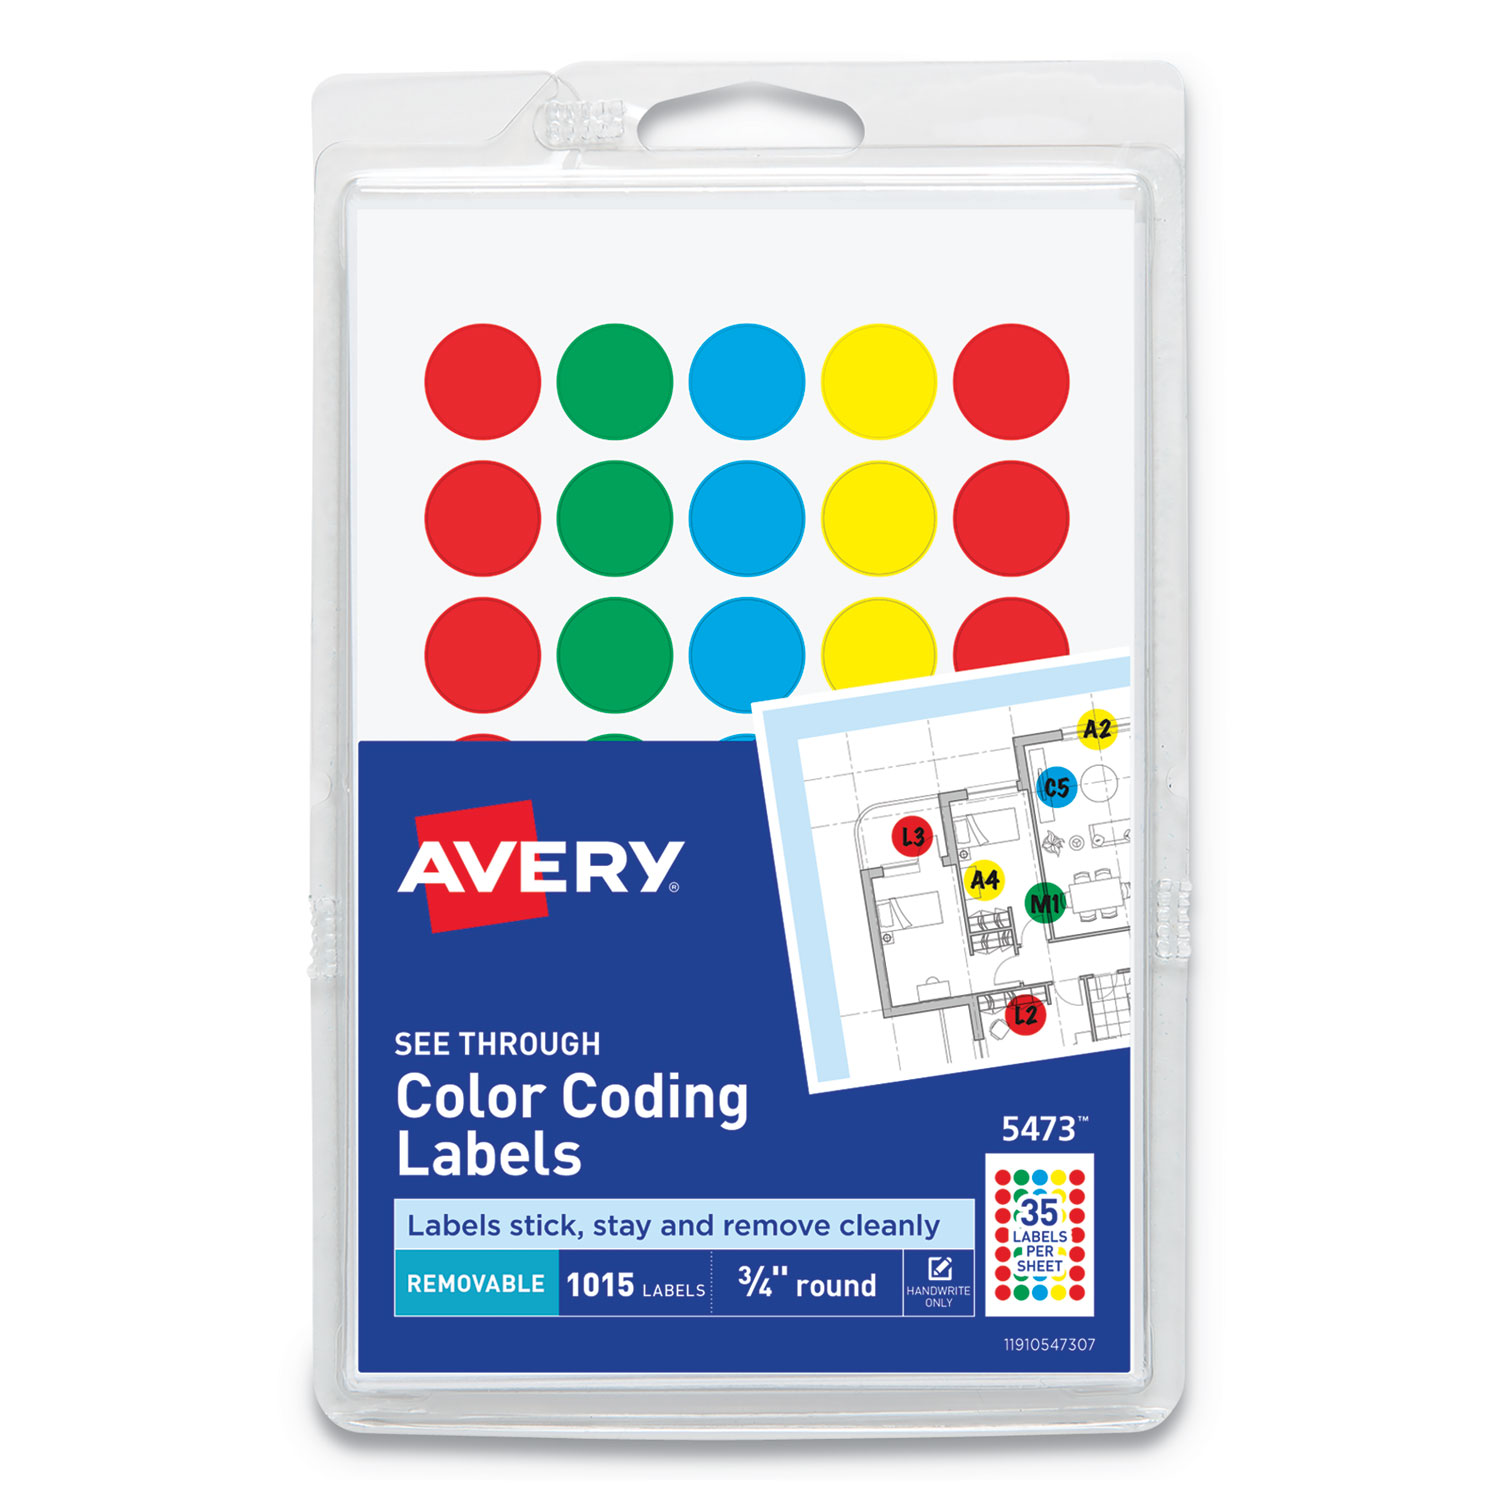  Avery 05473 Handwrite-Only Self-Adhesive See Through Removable Round Color Dots, 0.75 dia., Assorted Colors, 35/Sheet, 29 Sheets/Pack (AVE05473) 